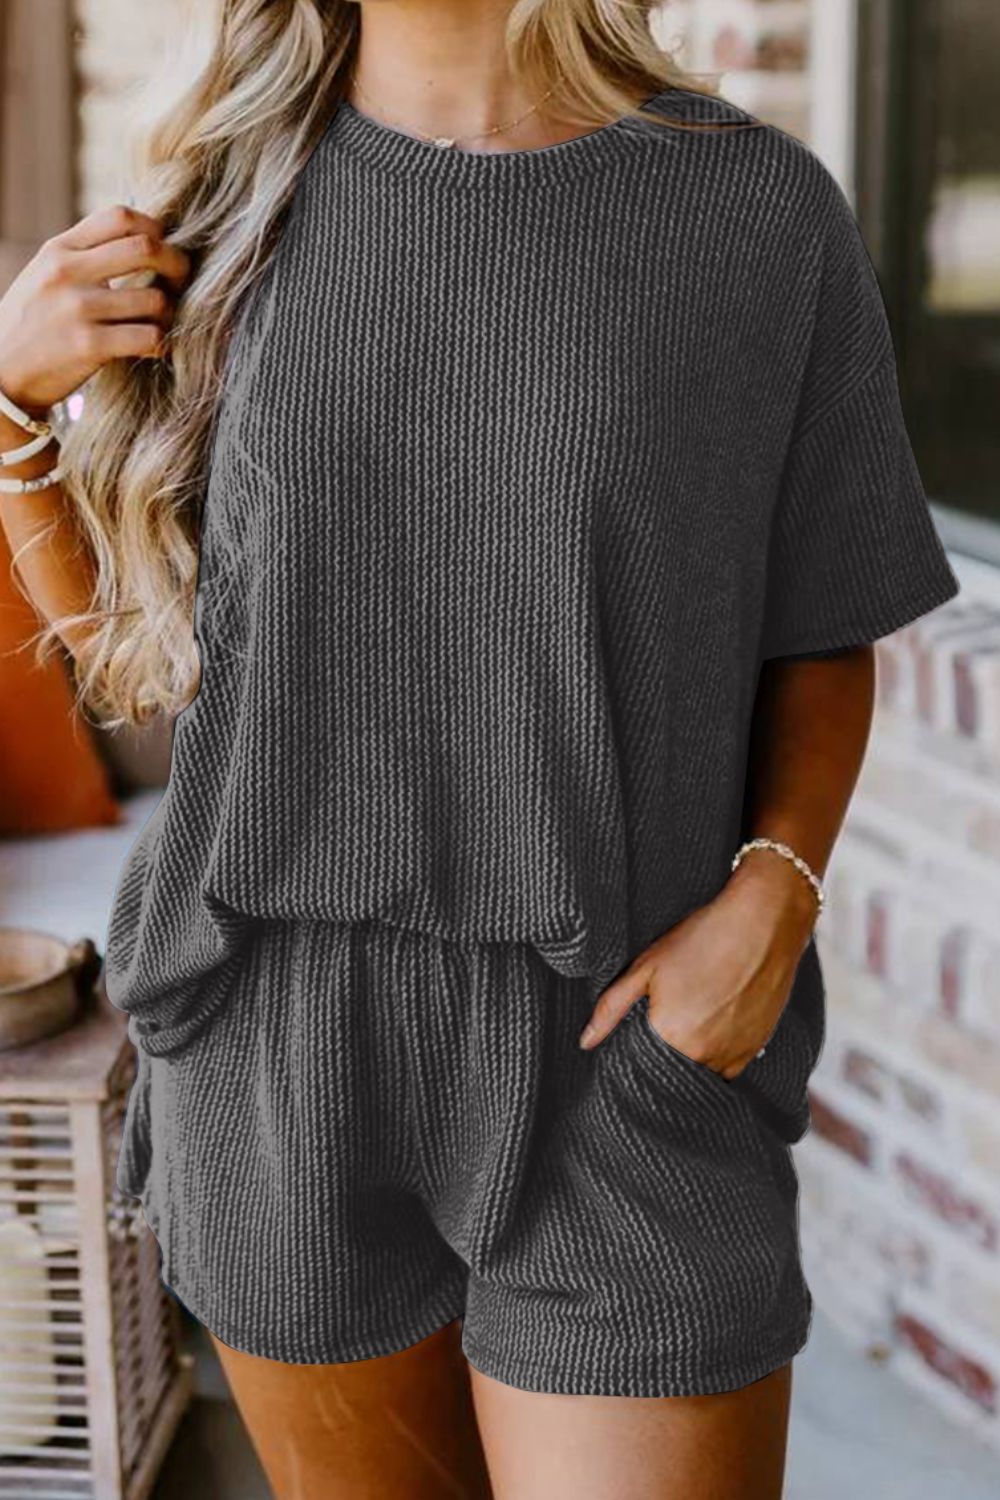 Textured Round Neck Top and Shorts Set in Charcoal